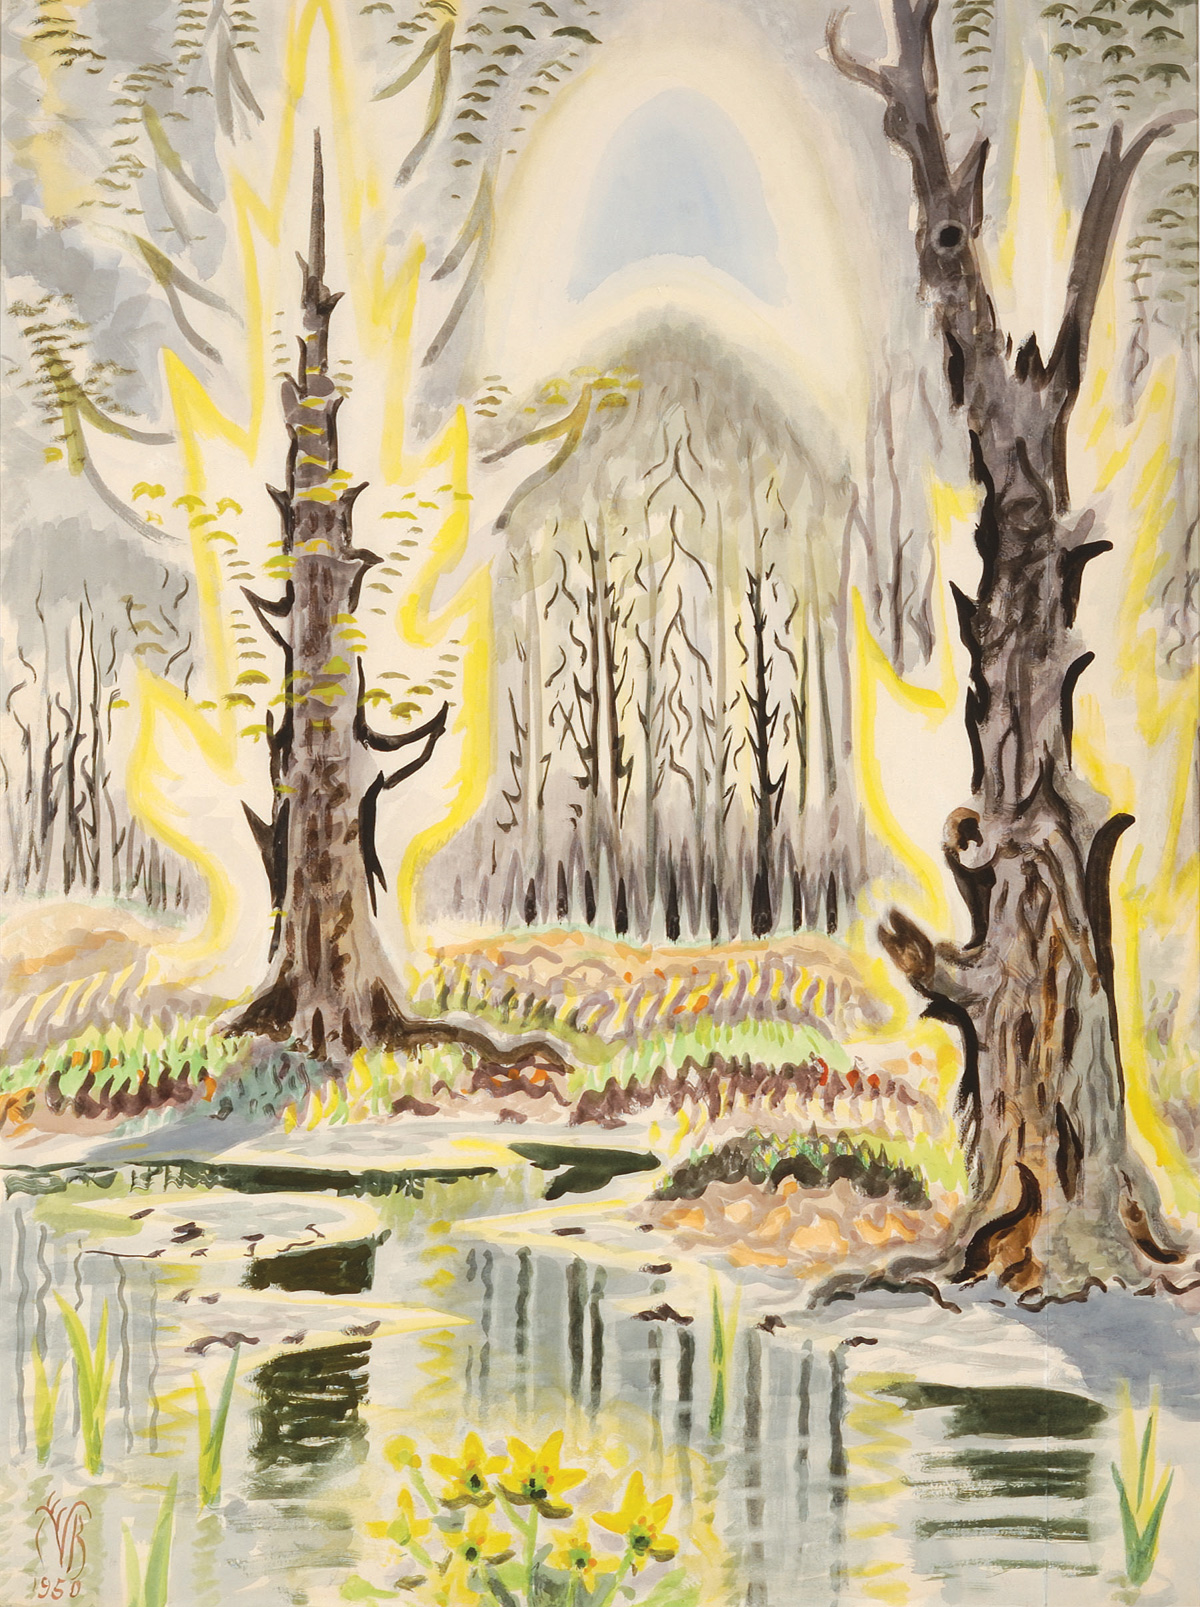 Waves In A Swamp The Paintings Of Charles Burchfield Hammer Museum